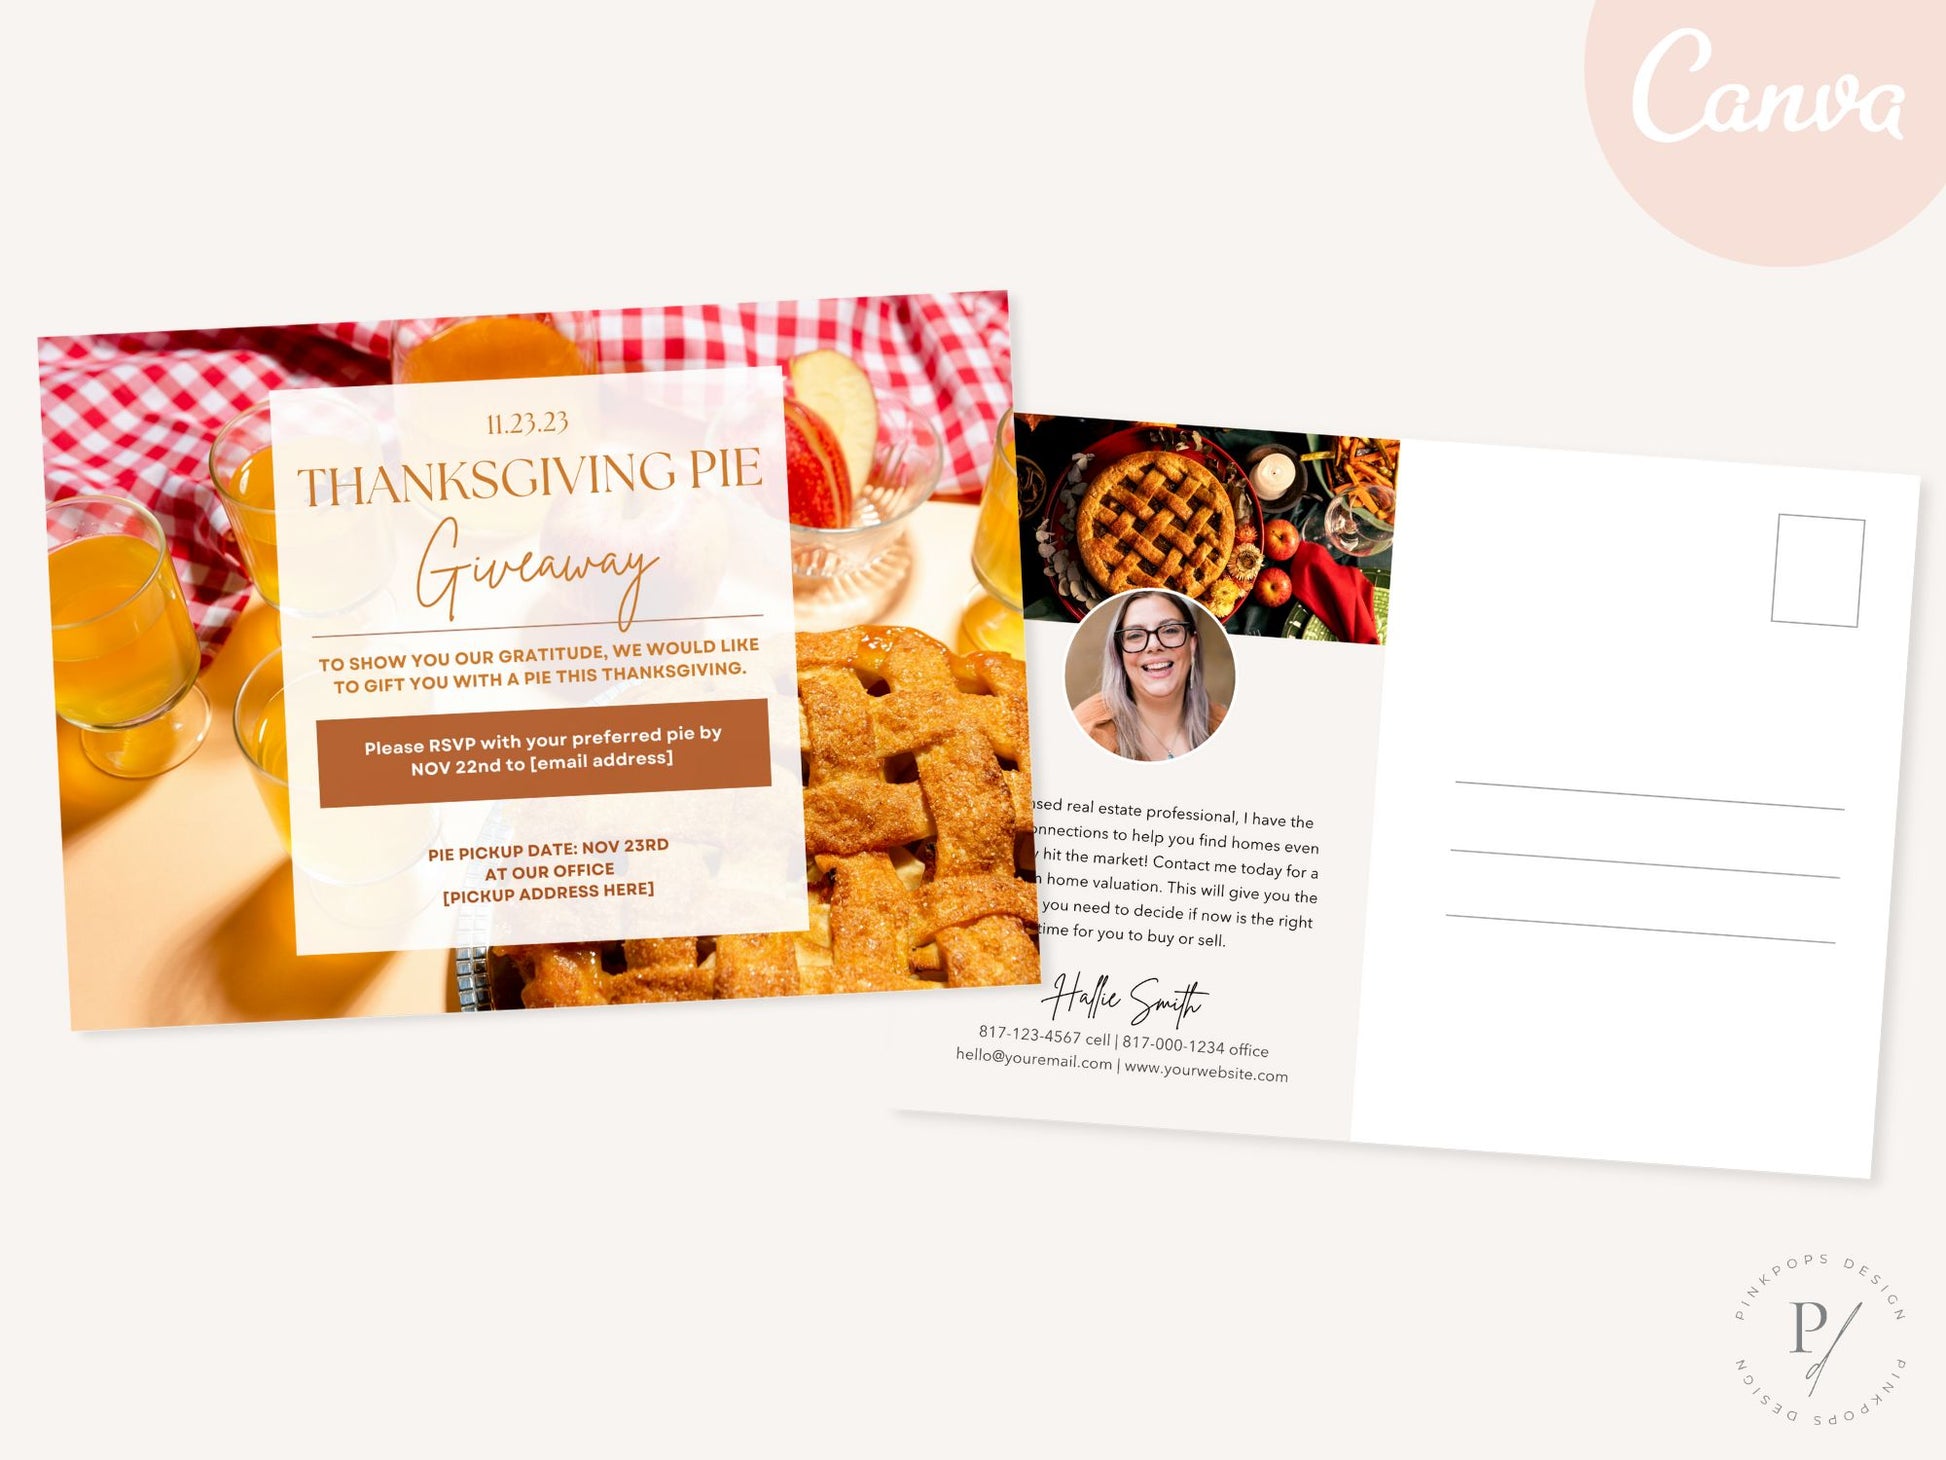 Real Estate Thanksgiving Pie Giveaway Postcard - Heartwarming postcard inviting clients to a delightful Thanksgiving pie giveaway for a memorable and engaging way to express gratitude and foster connections during the festive season.